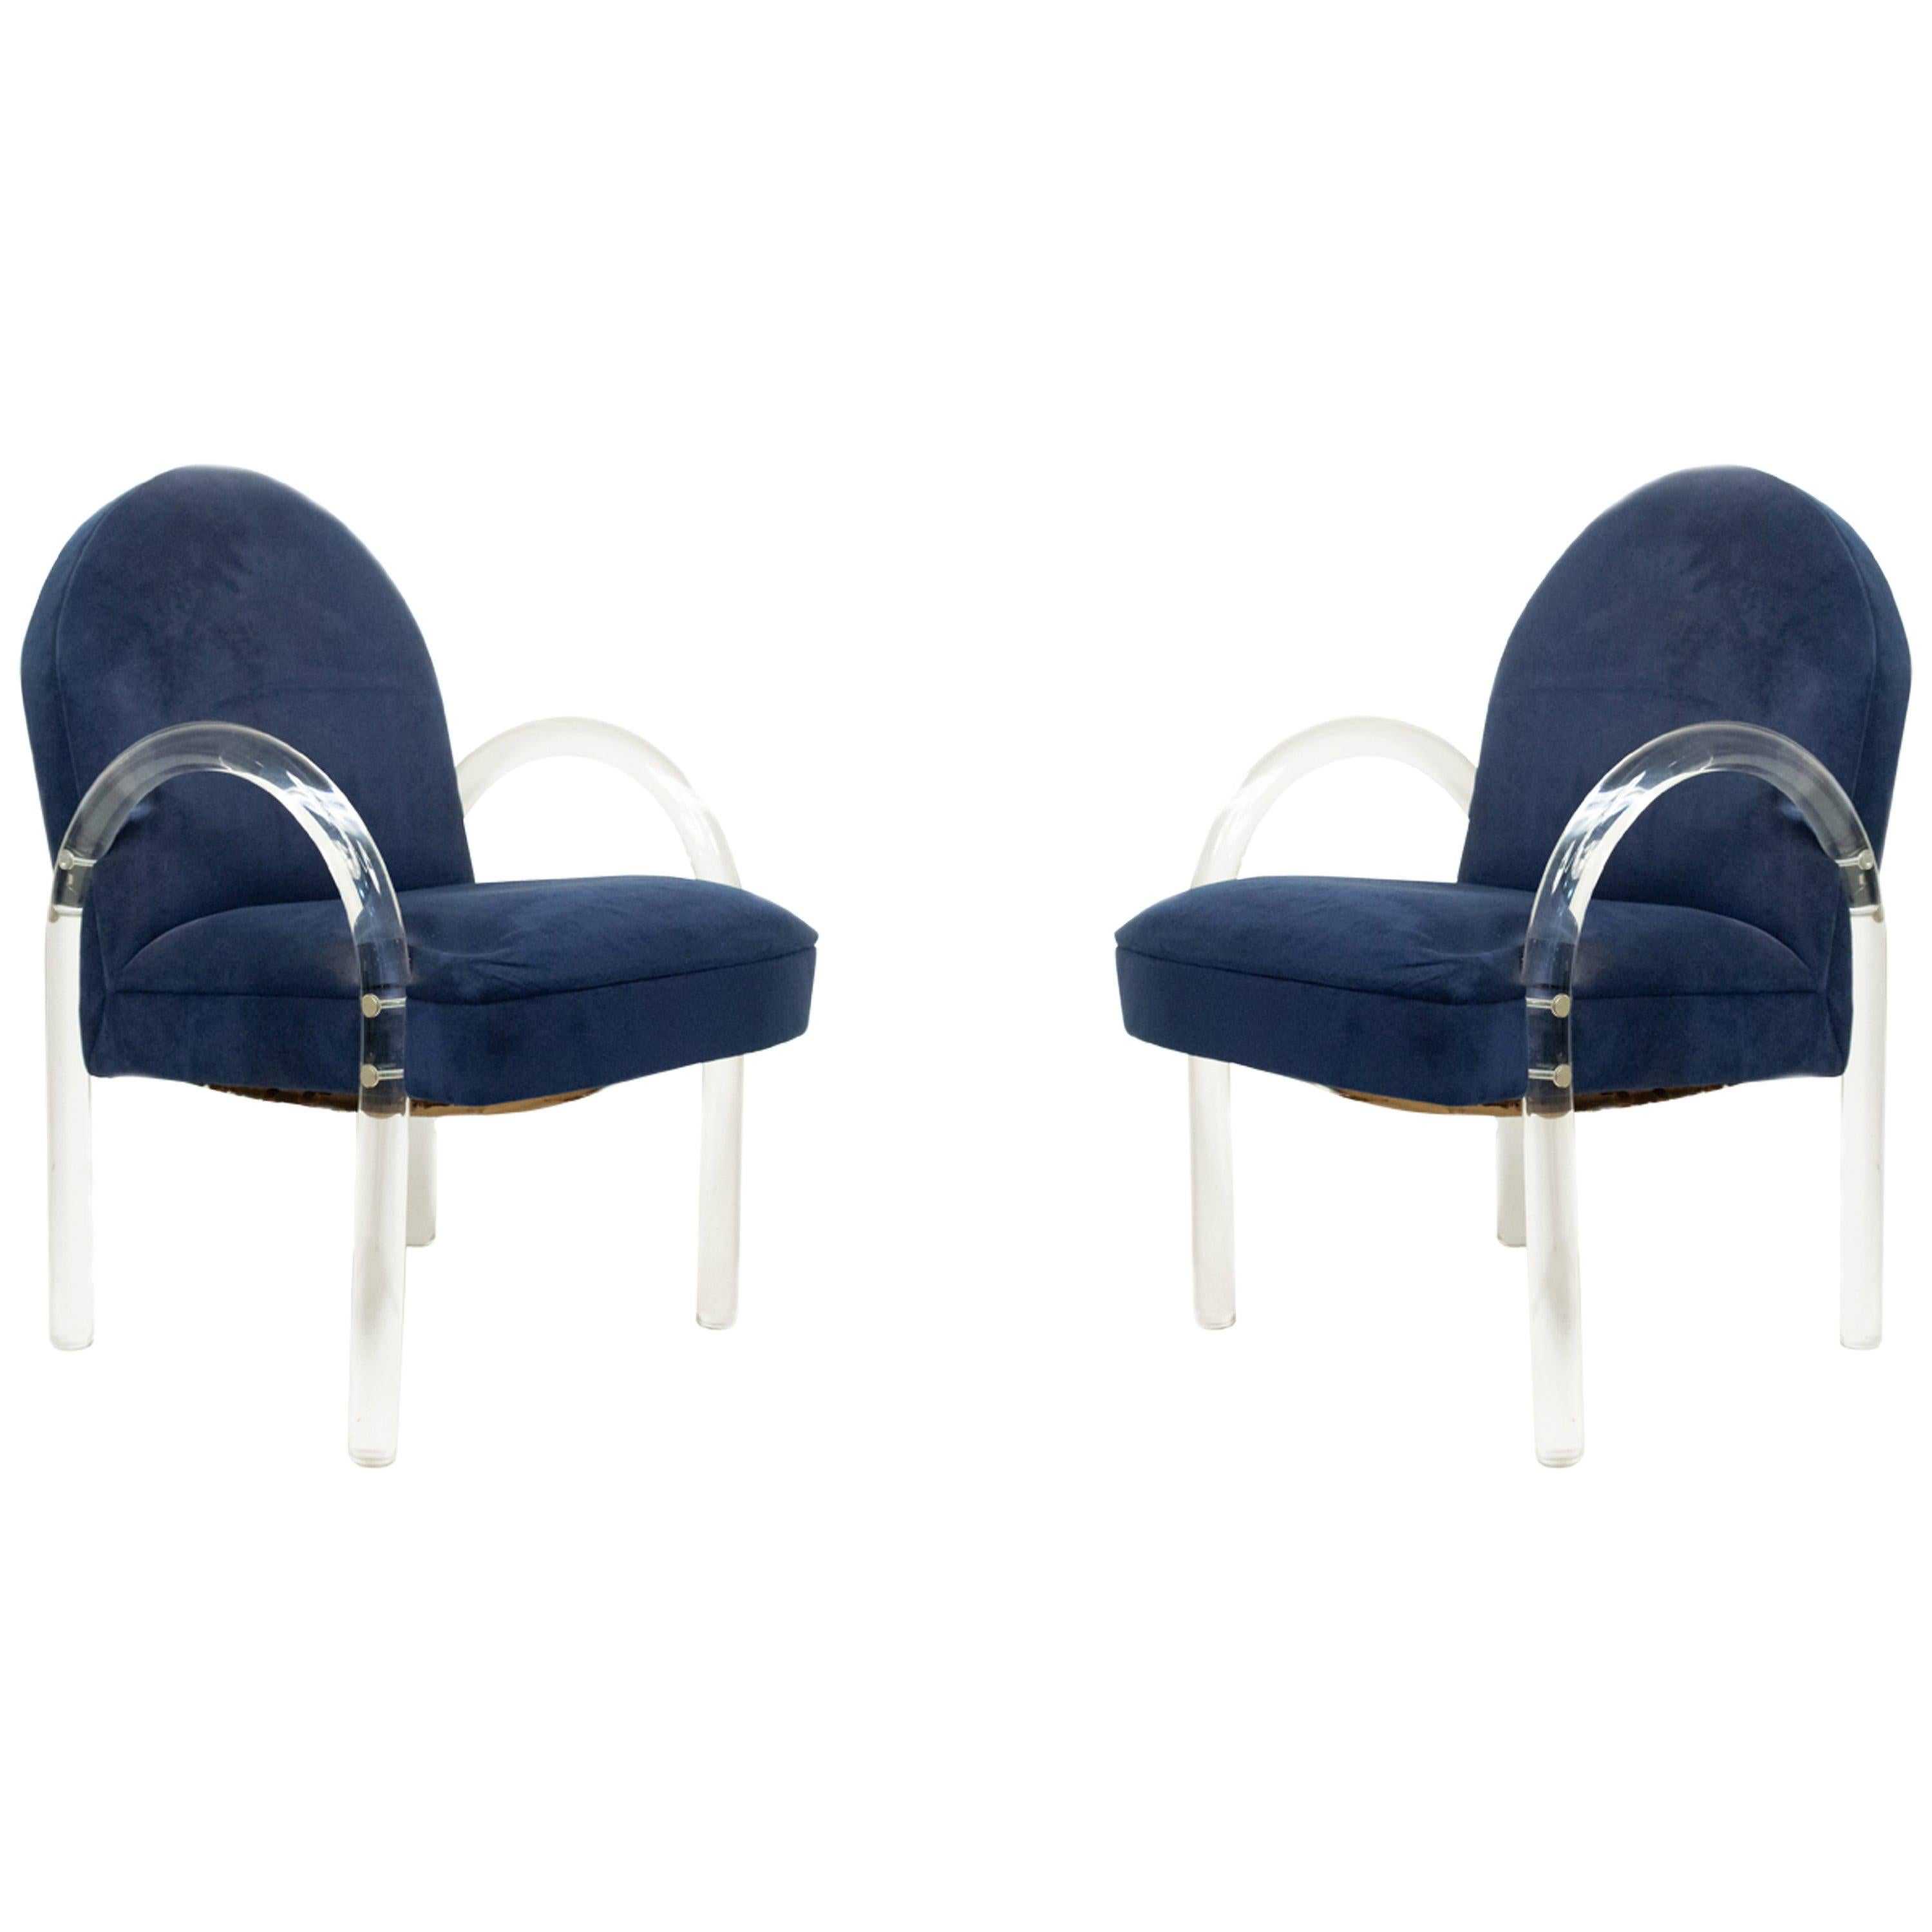 Pace Collection Lucite Waterfall Chairs with Blue Upholstery